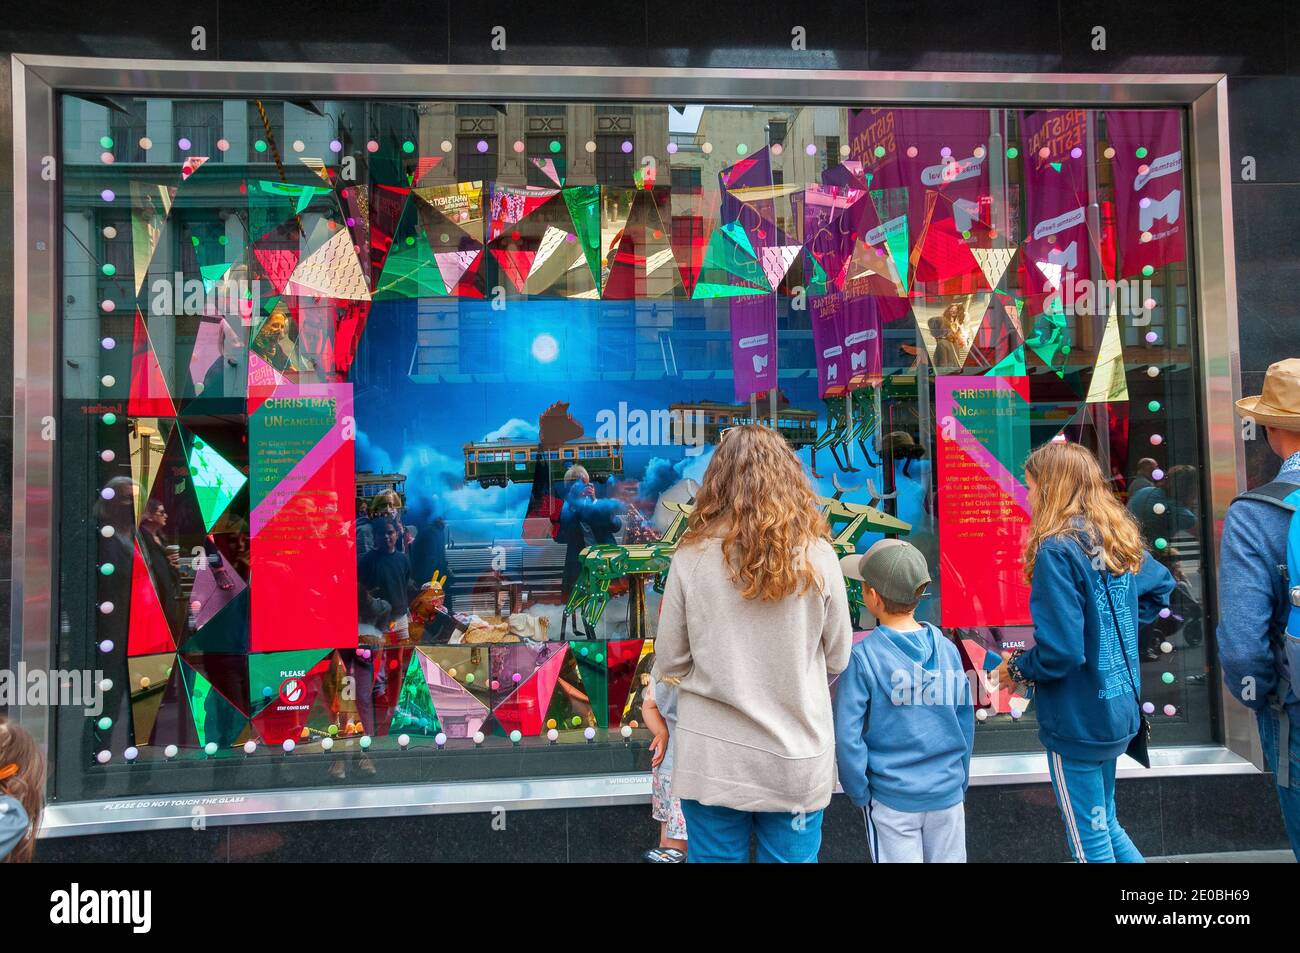 Christmas 2020 windows at the Myer department store in Bourke Street Mall, Melbourne, continuing a 65-year tradition despite the COVID-19 pandemic Stock Photo